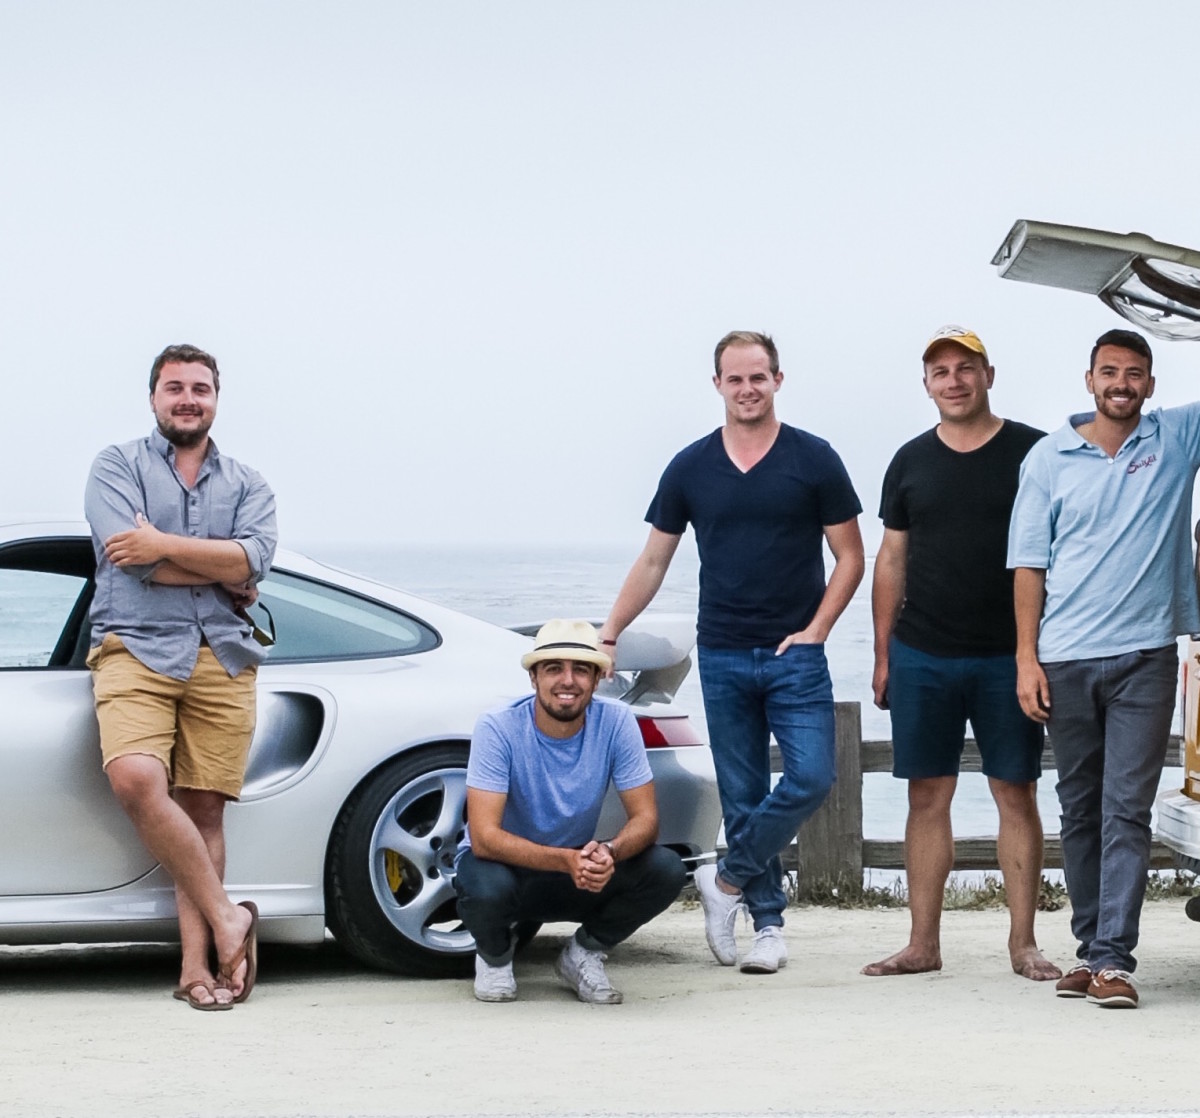 The team behind MotorCar Studios includes (from left to right) Andrew Mastin, Andrew Paolucci, Calvin Miller, Nick Zabrecky and Adolfo Massari.